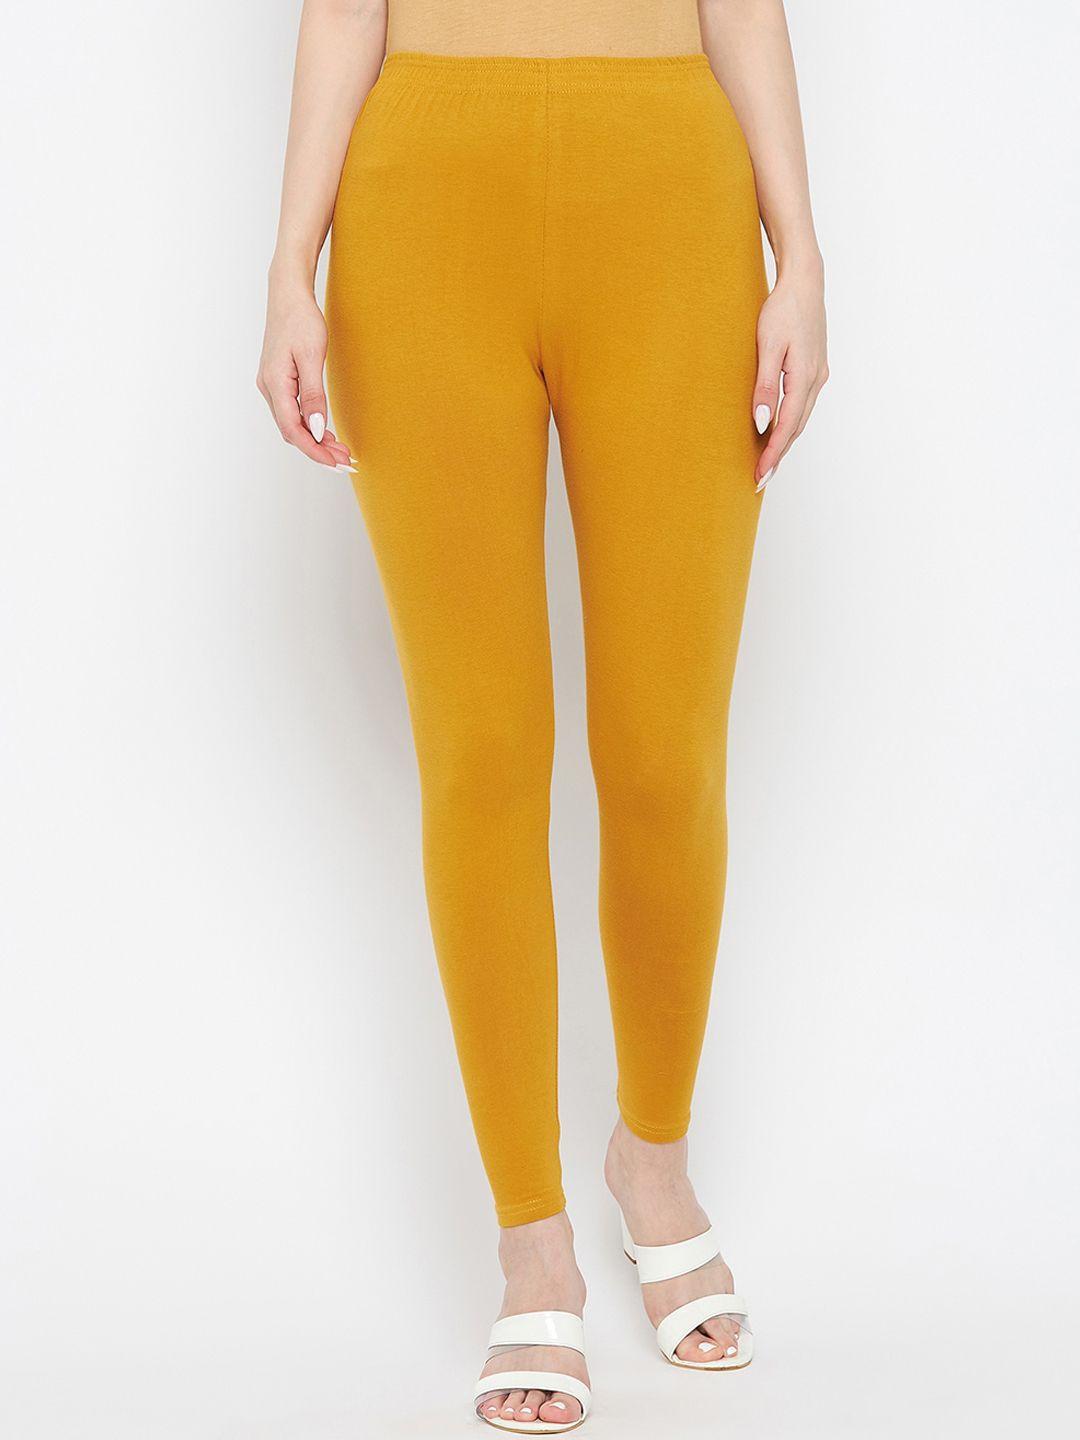 clora creation women mustard yellow solid cotton ankle-length leggings